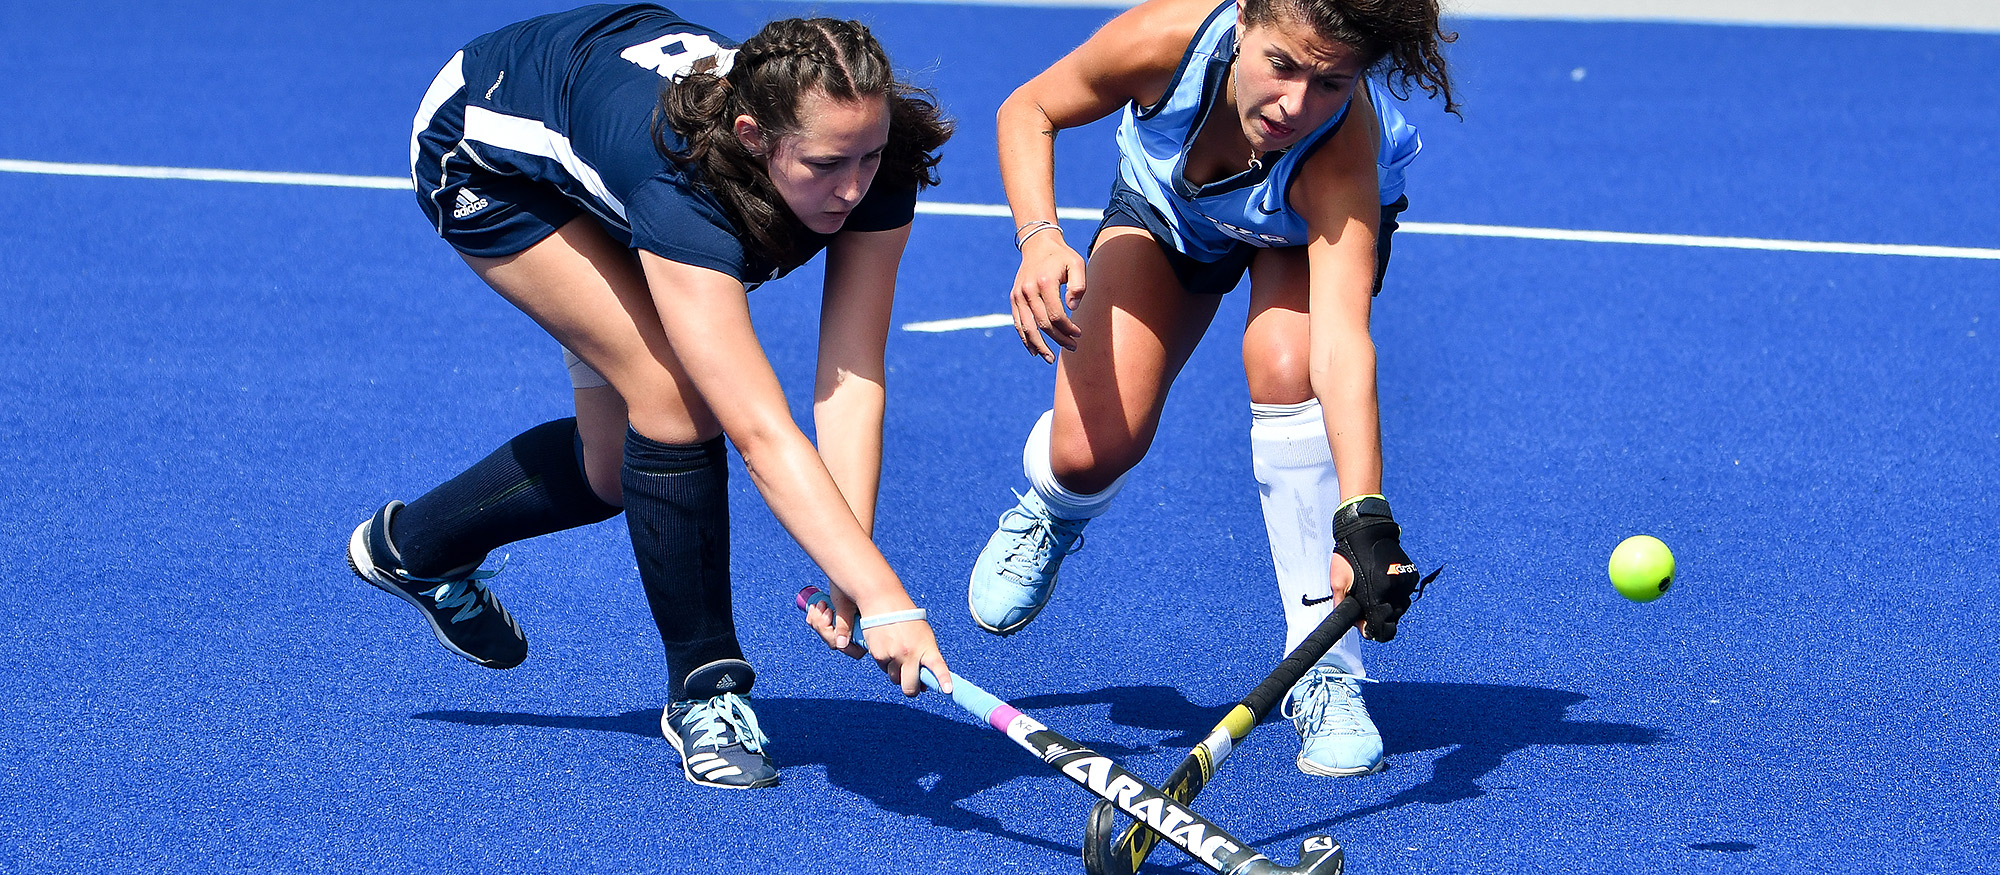 Kylie Brooks scored a goal and assisted on another in Mount Holyoke's 4-0 victory over Eastern Connecticut State on Oct. 27, 2022. (RJB Sports file photo)